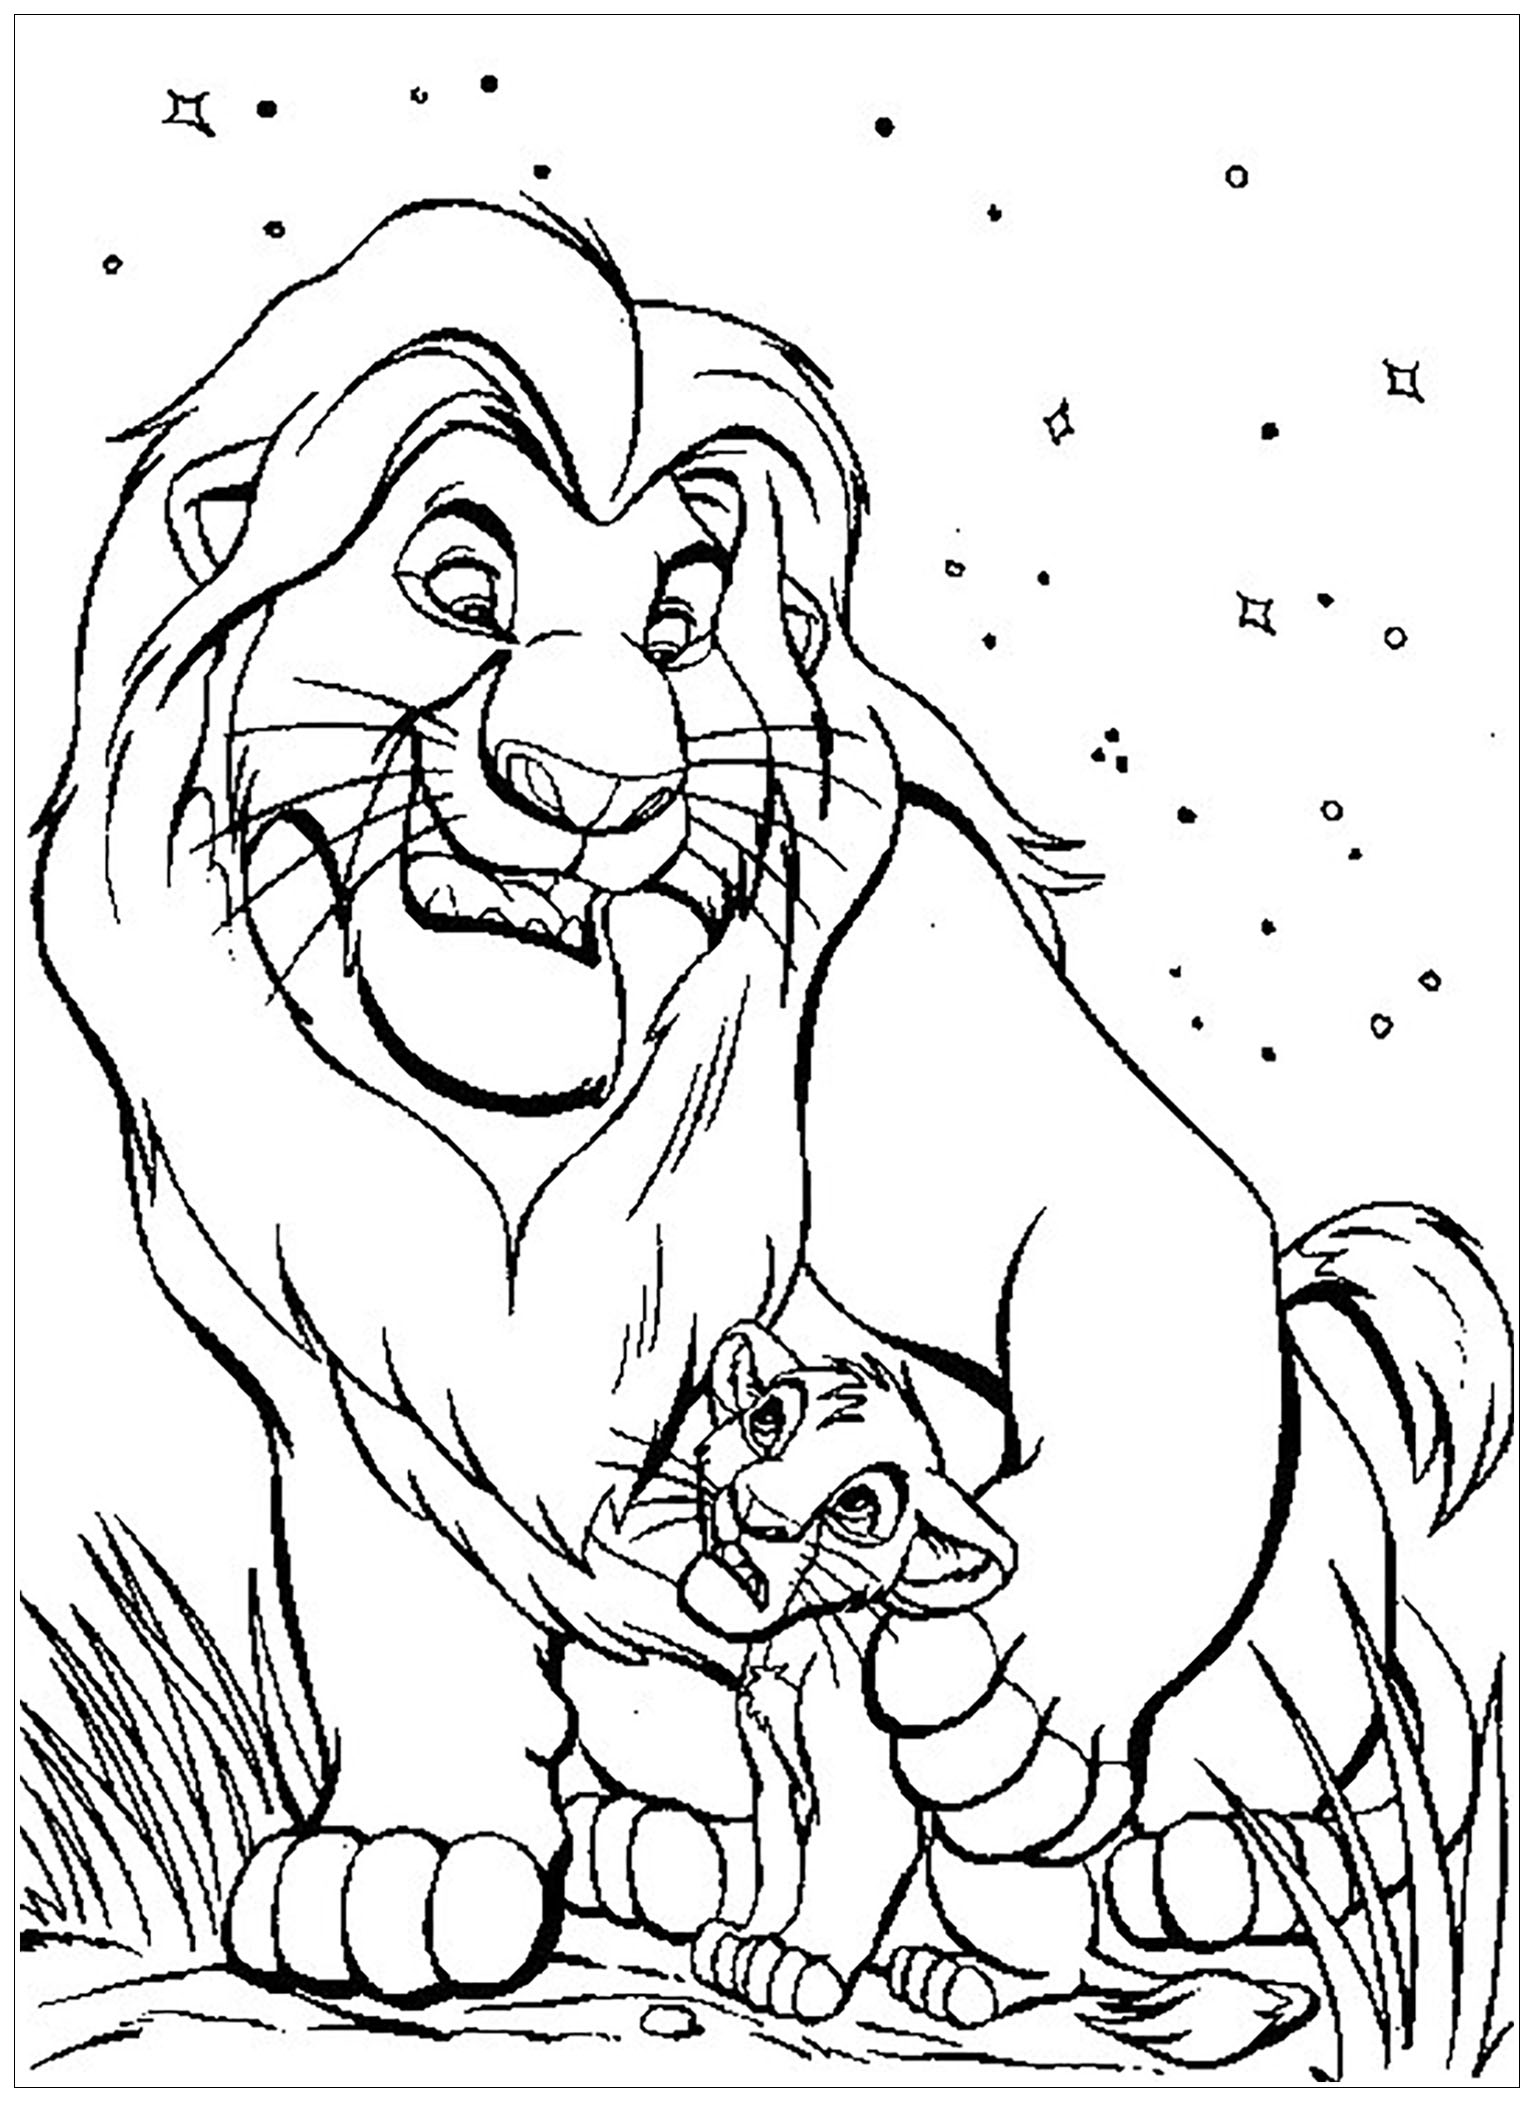 Mufasa with Simba - The Lion King Kids Coloring Pages